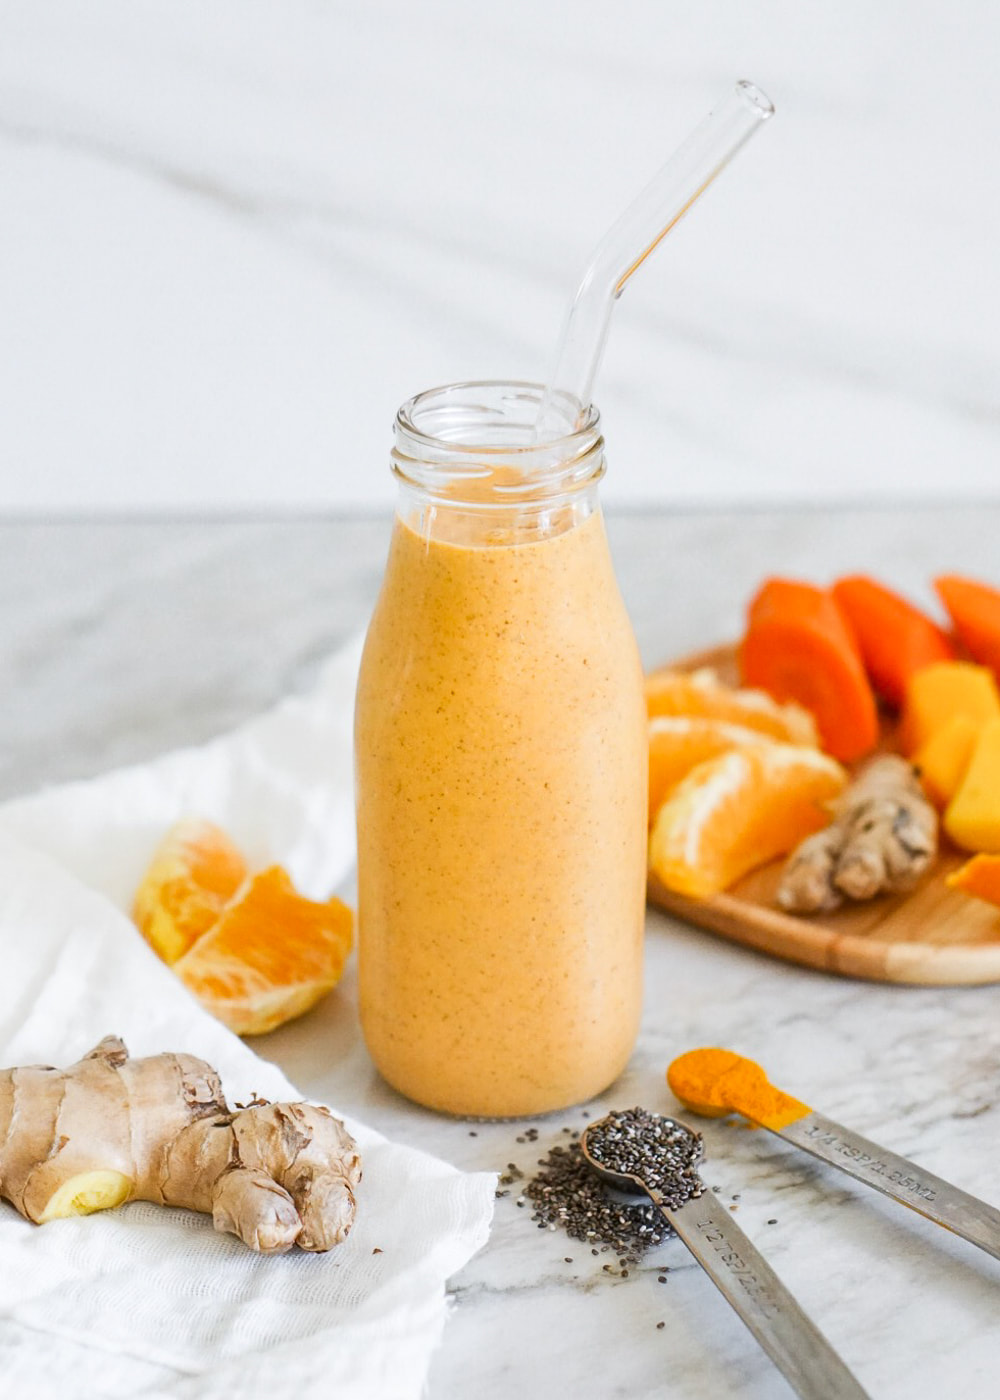 Serving Up Delicious Single-Serve Smoothies with BlendJet + Recipes -  Weekend Jaunts